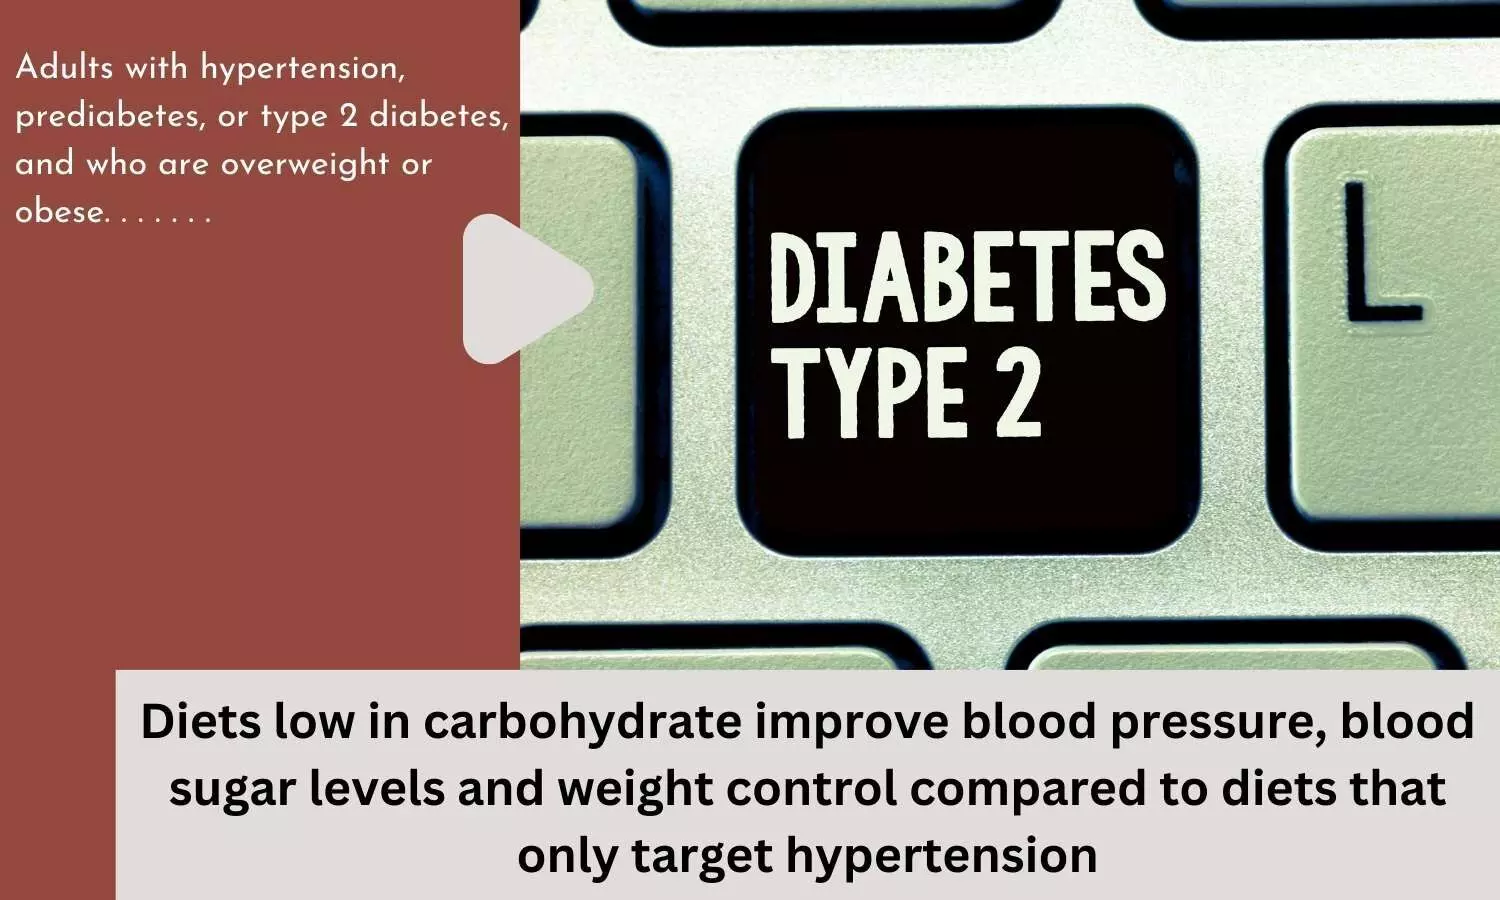 Diets low in carbohydrate improve blood pressure, blood sugar levels and weight control compared to diets that only target hypertension